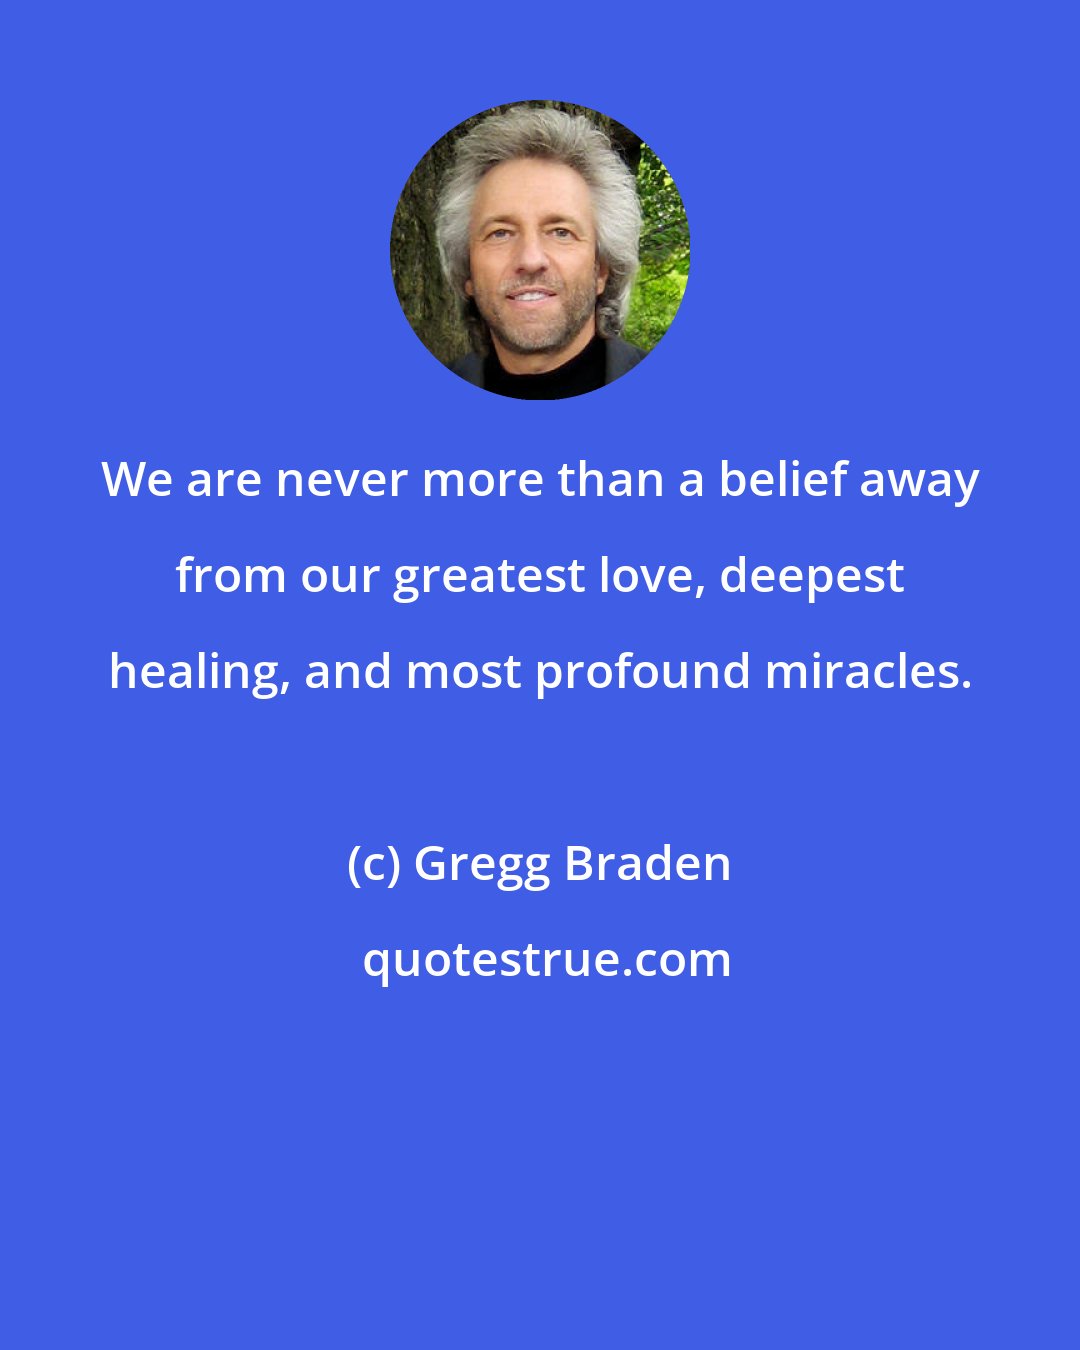 Gregg Braden: We are never more than a belief away from our greatest love, deepest healing, and most profound miracles.